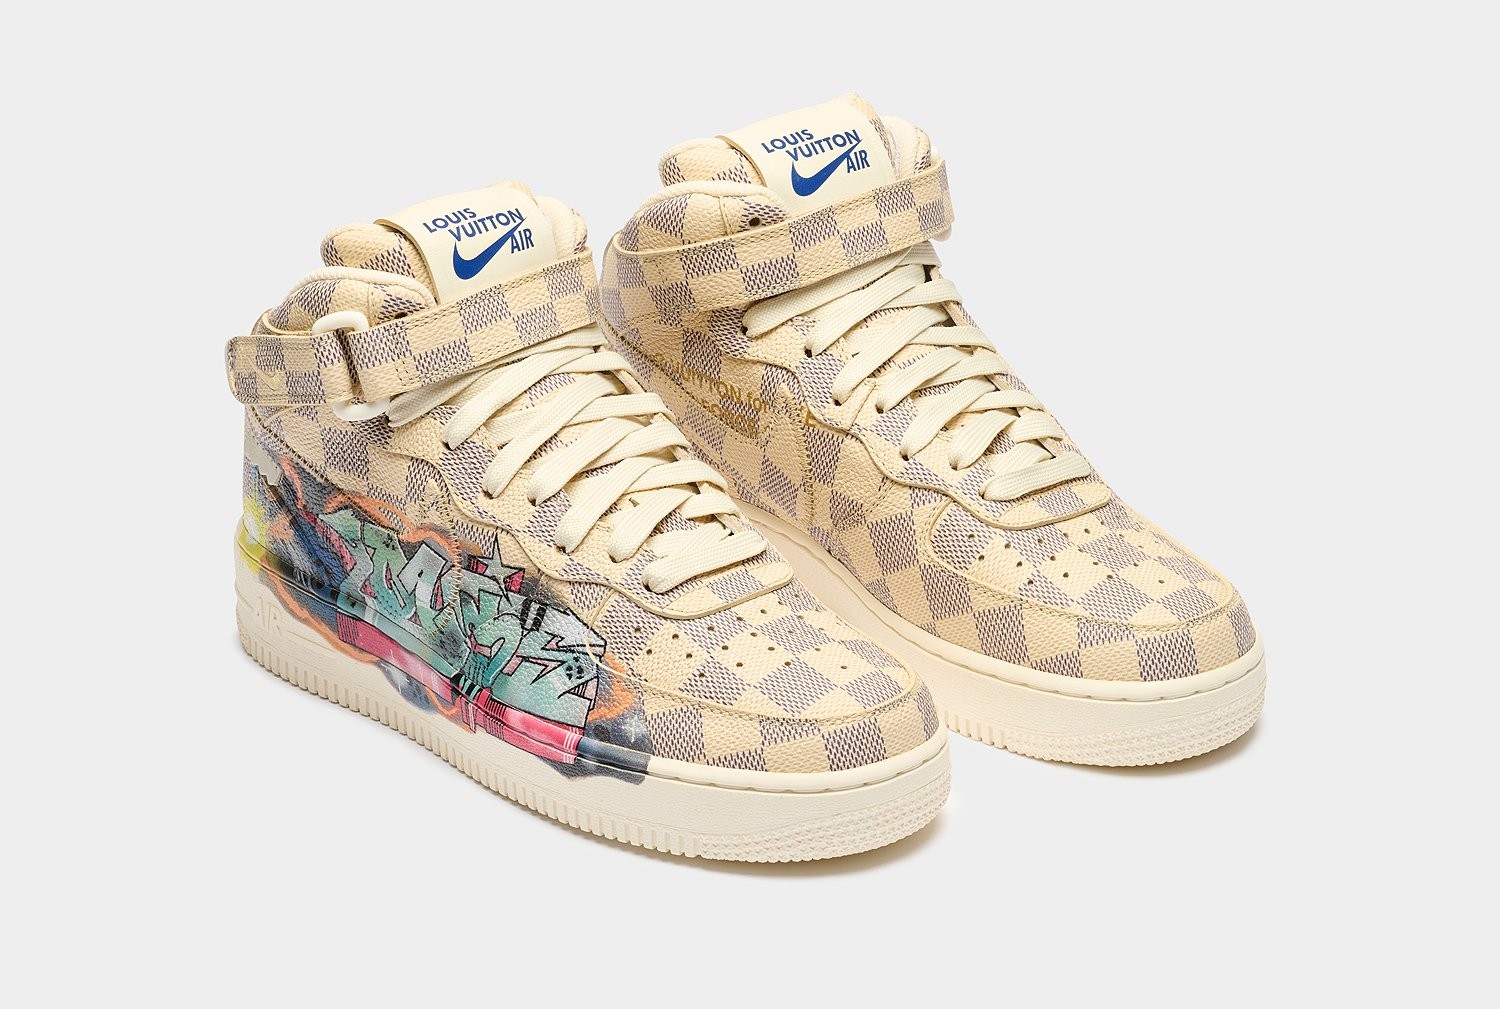 A complete series of nine Louis Vuitton and Nike “Air Force 1” by Virgil Abloh - Image 22 of 50